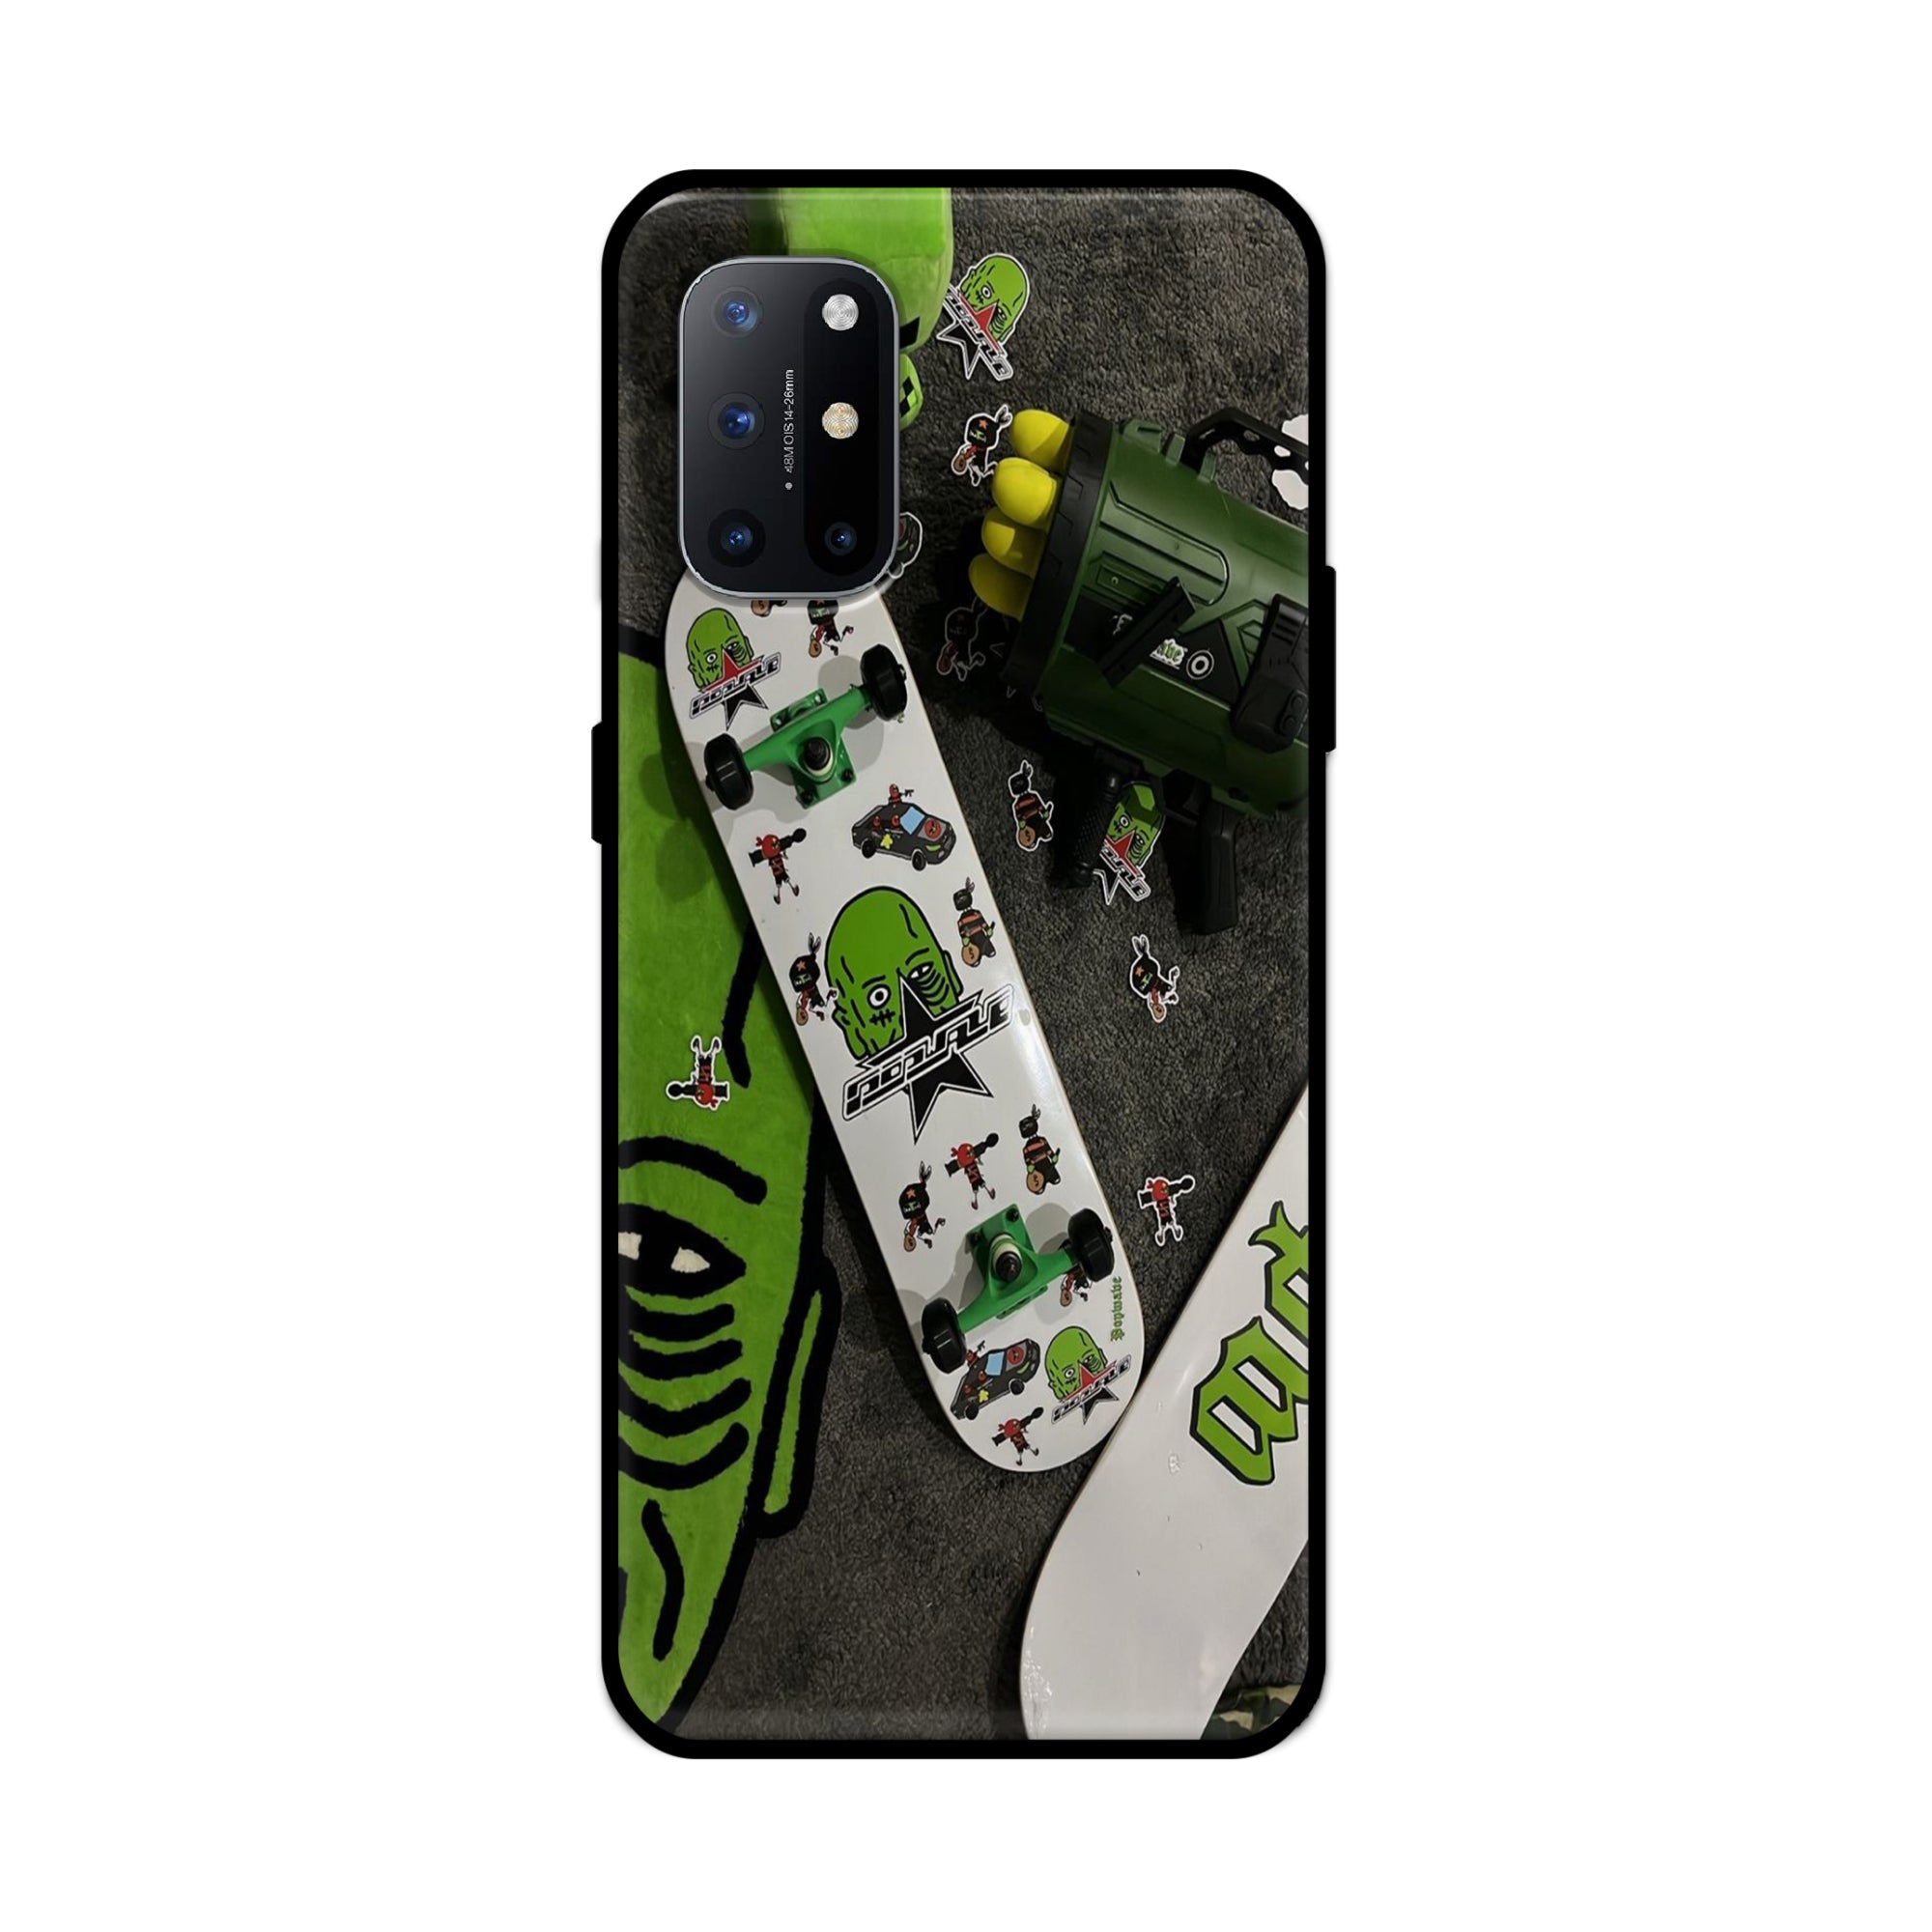 Buy Hulk Skateboard Metal-Silicon Back Mobile Phone Case/Cover For Oneplus 9R / 8T Online